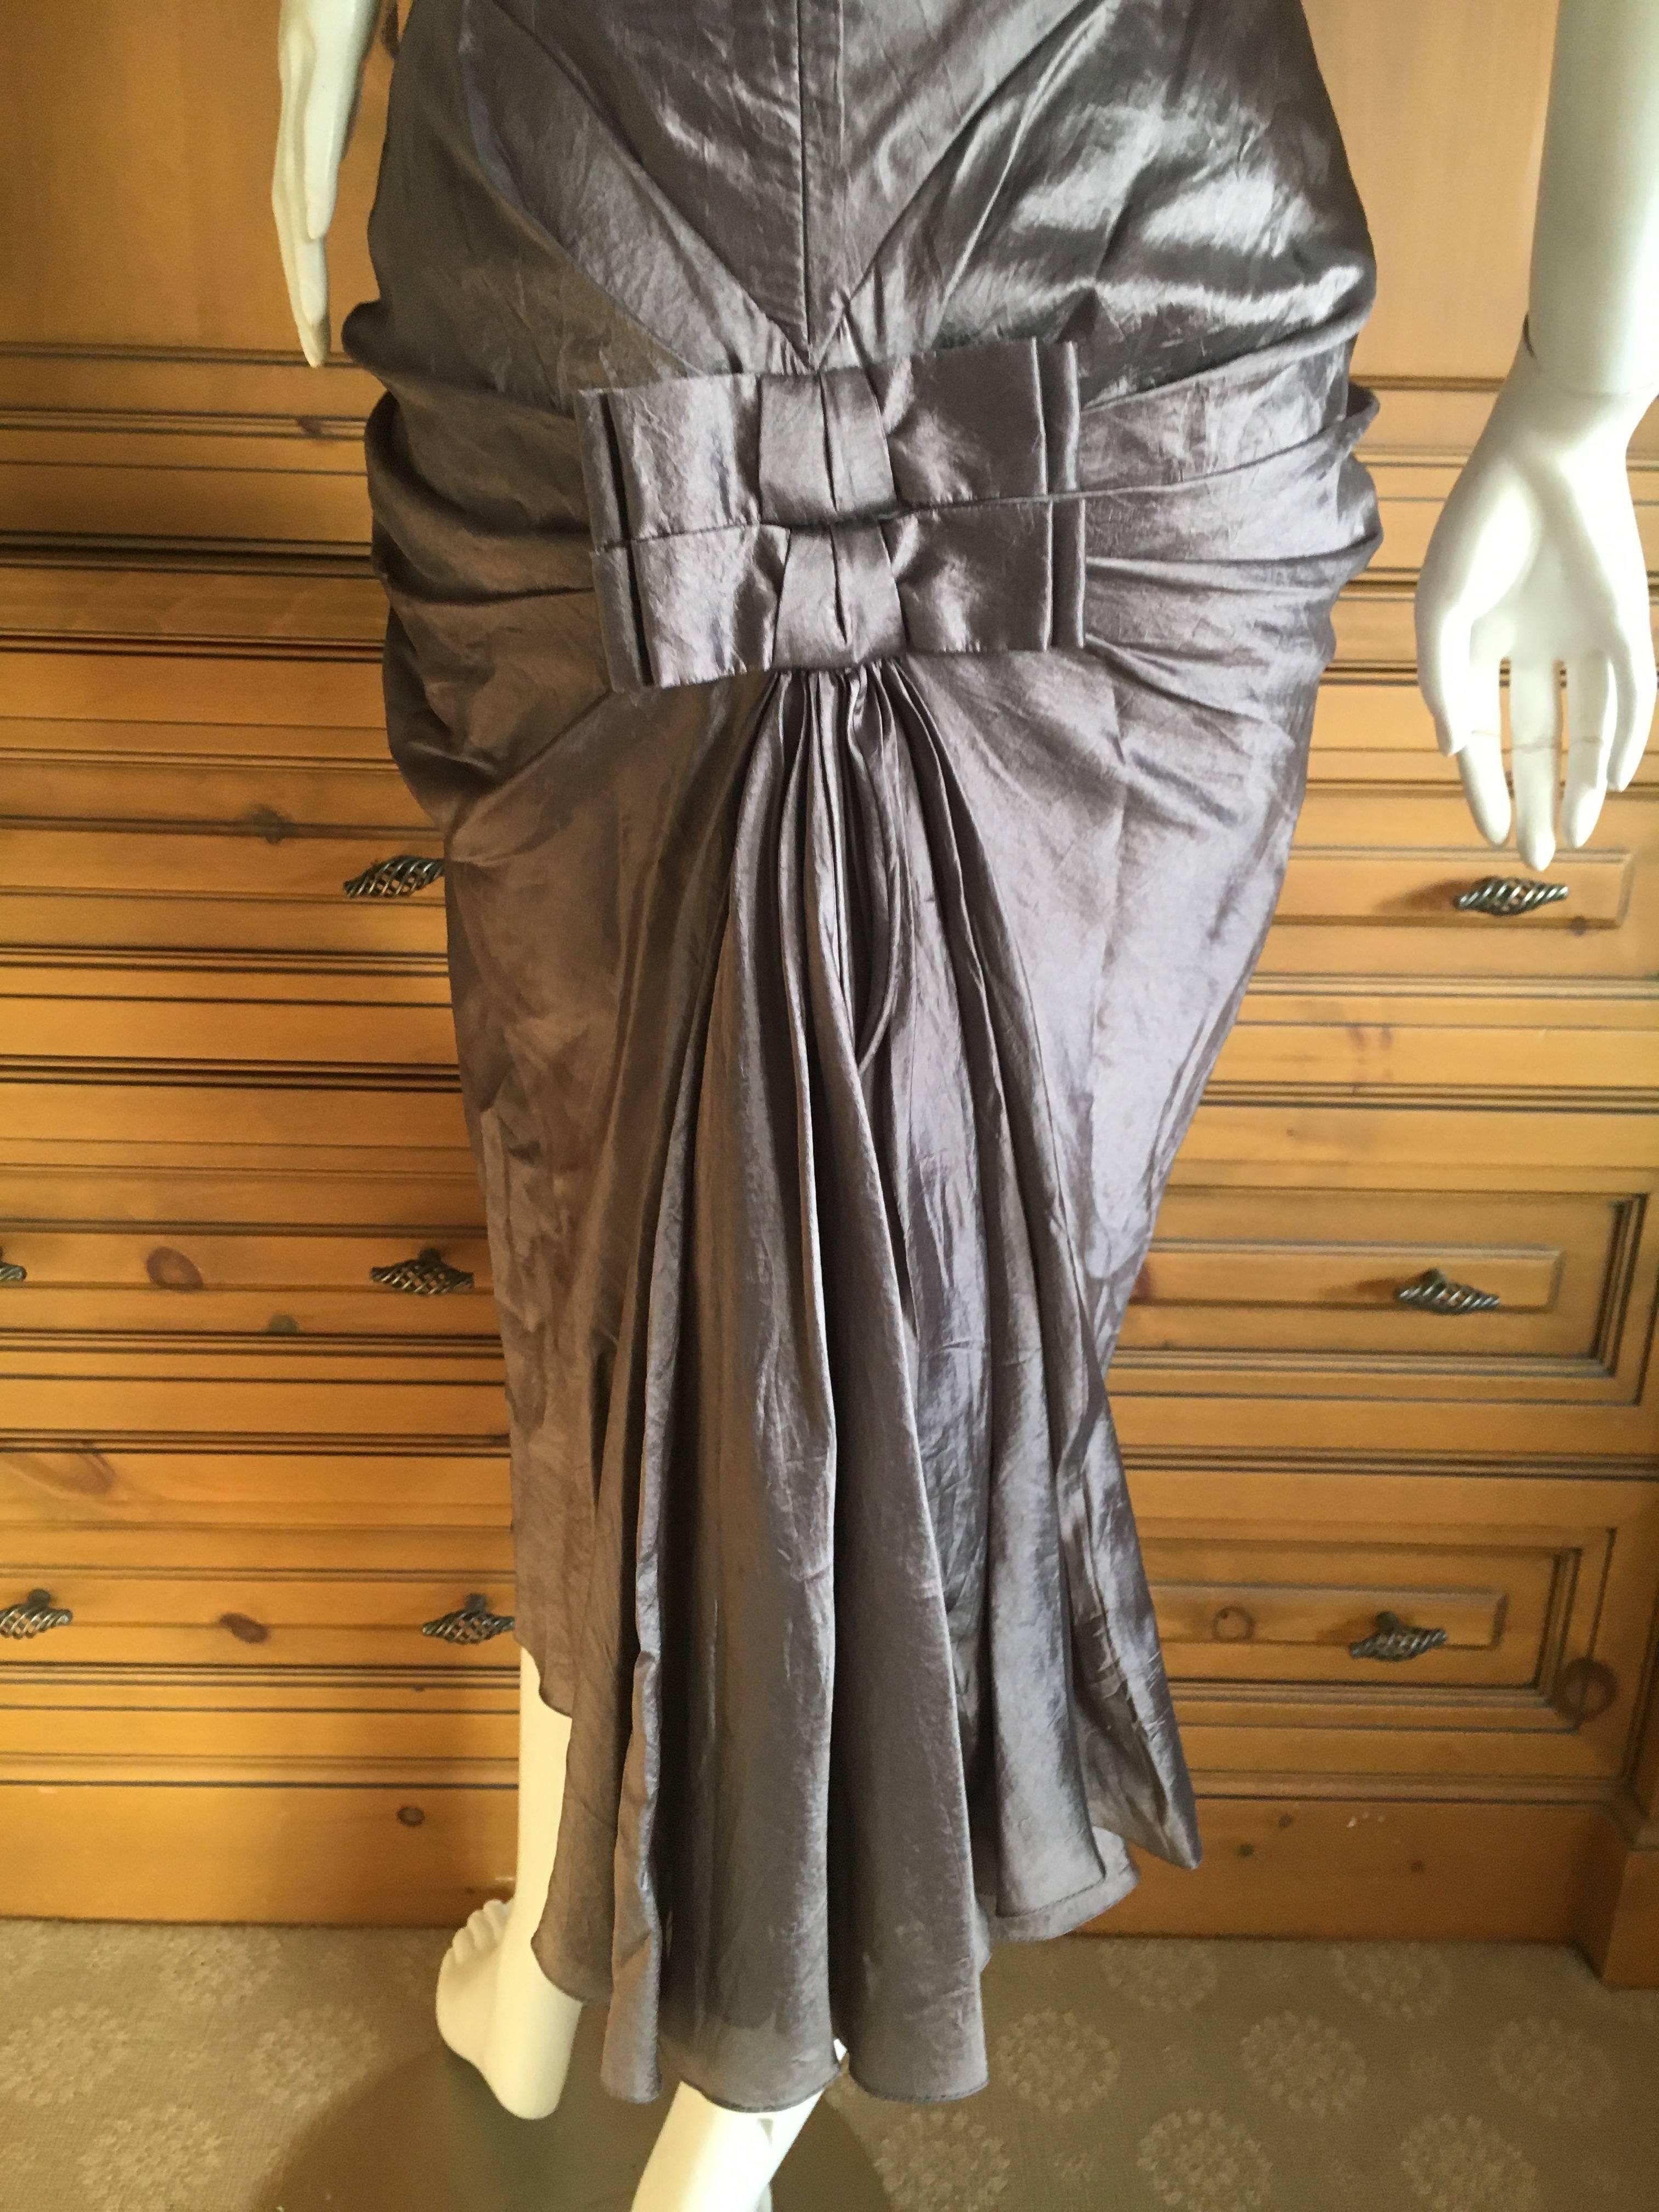 Christian Dior by John Galliano 2006 Silver Gray Dupioni Silk 1940's Style Dress In Excellent Condition For Sale In Cloverdale, CA